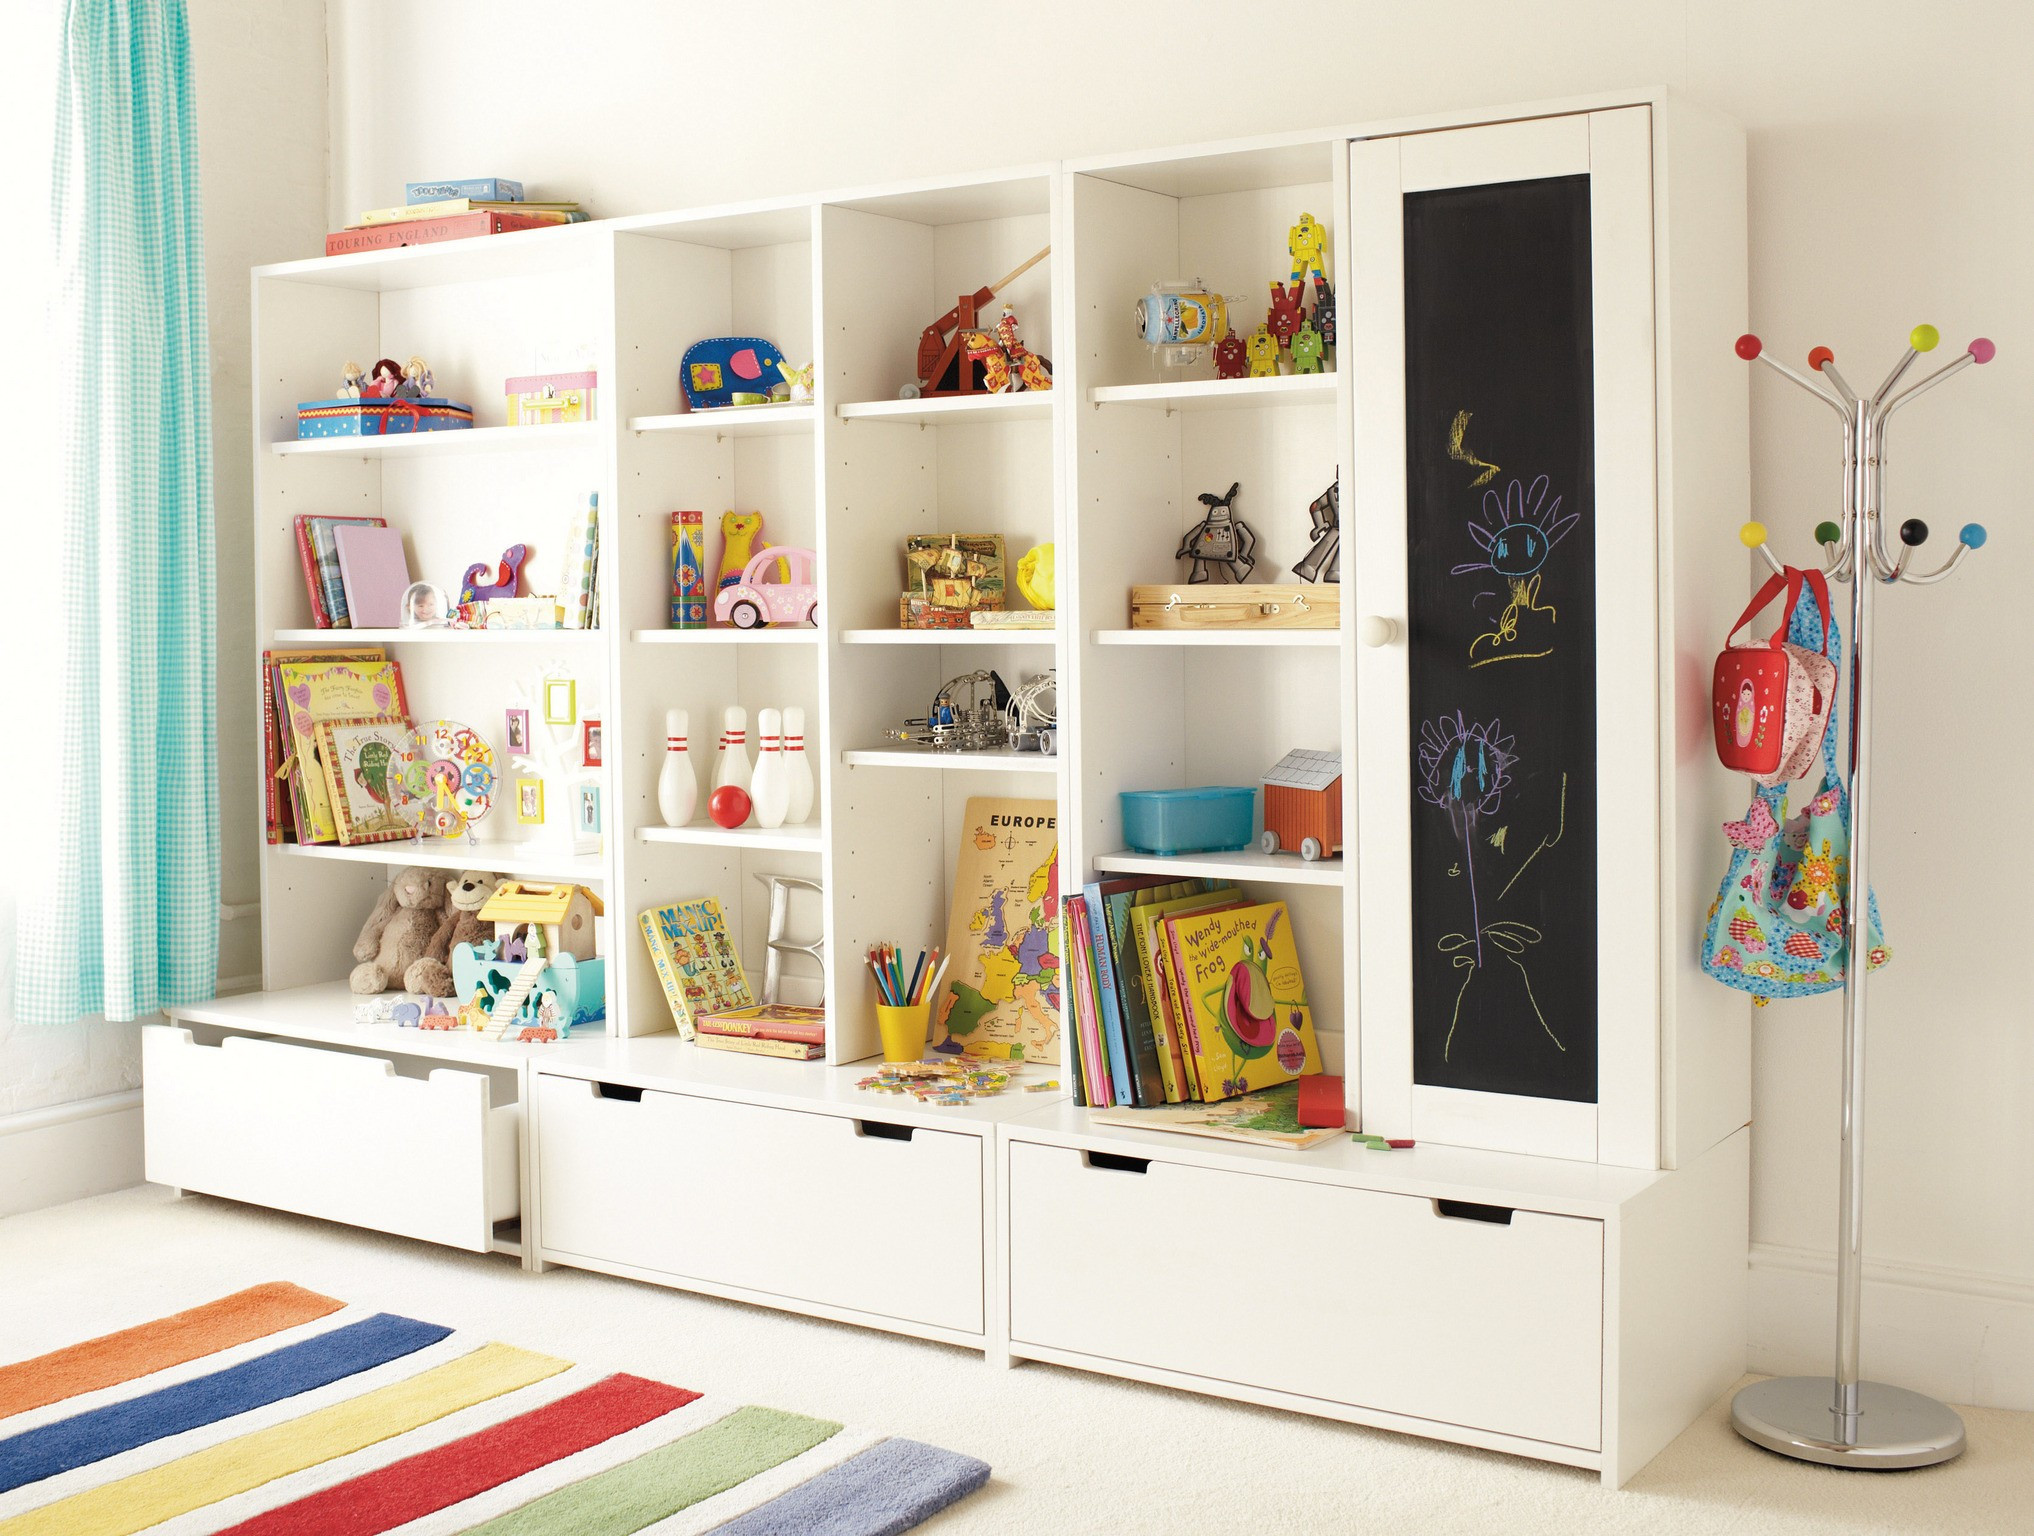 Kids Playroom Furniture
 5 Options of Playroom Storage Furniture to Organize All of